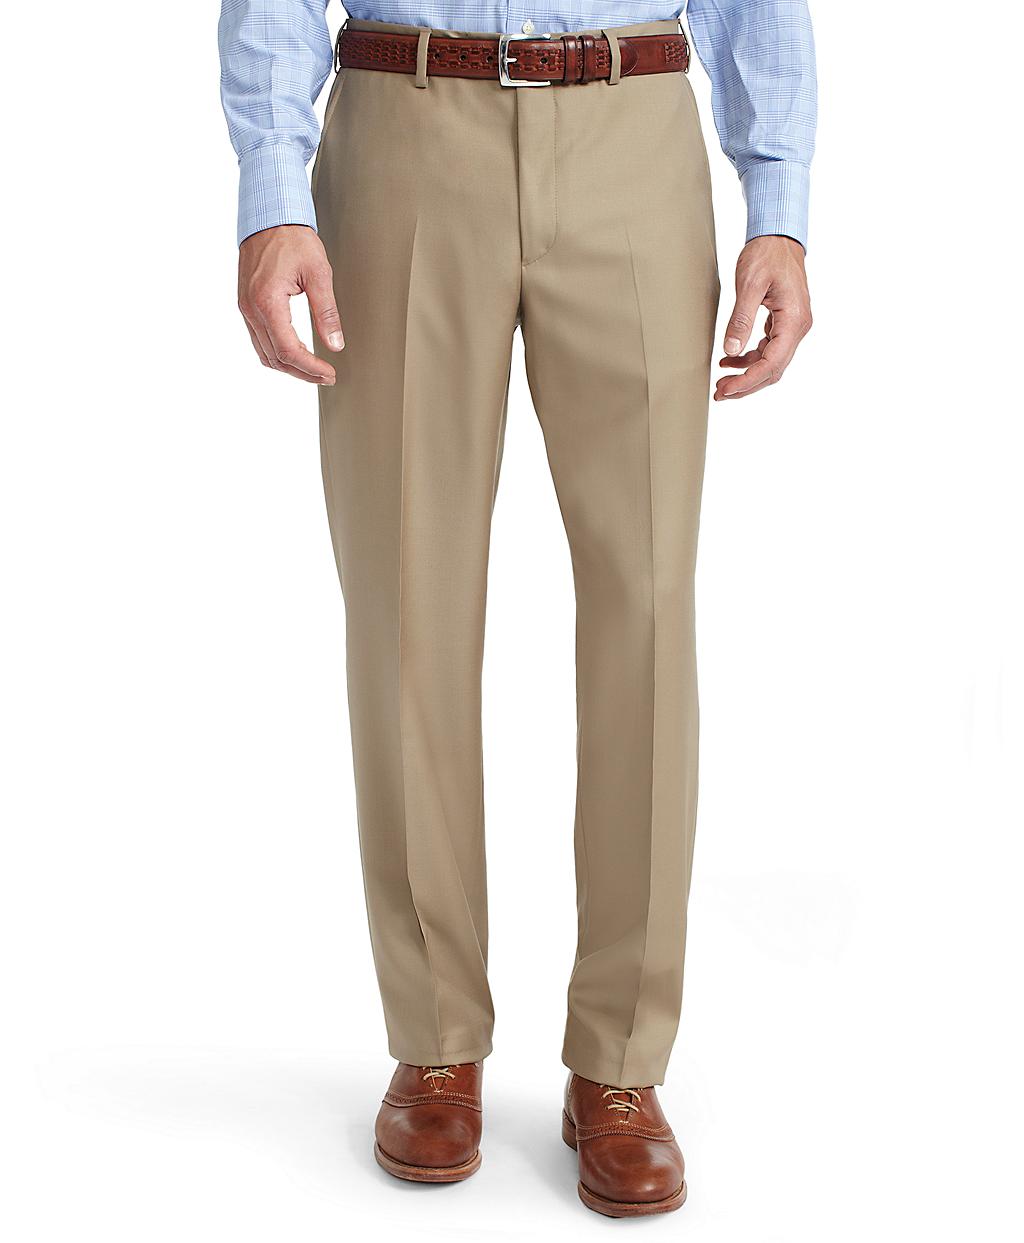 Lyst - Brooks Brothers Fitzgerald Tan Solid Gabardine Suit in Natural ...